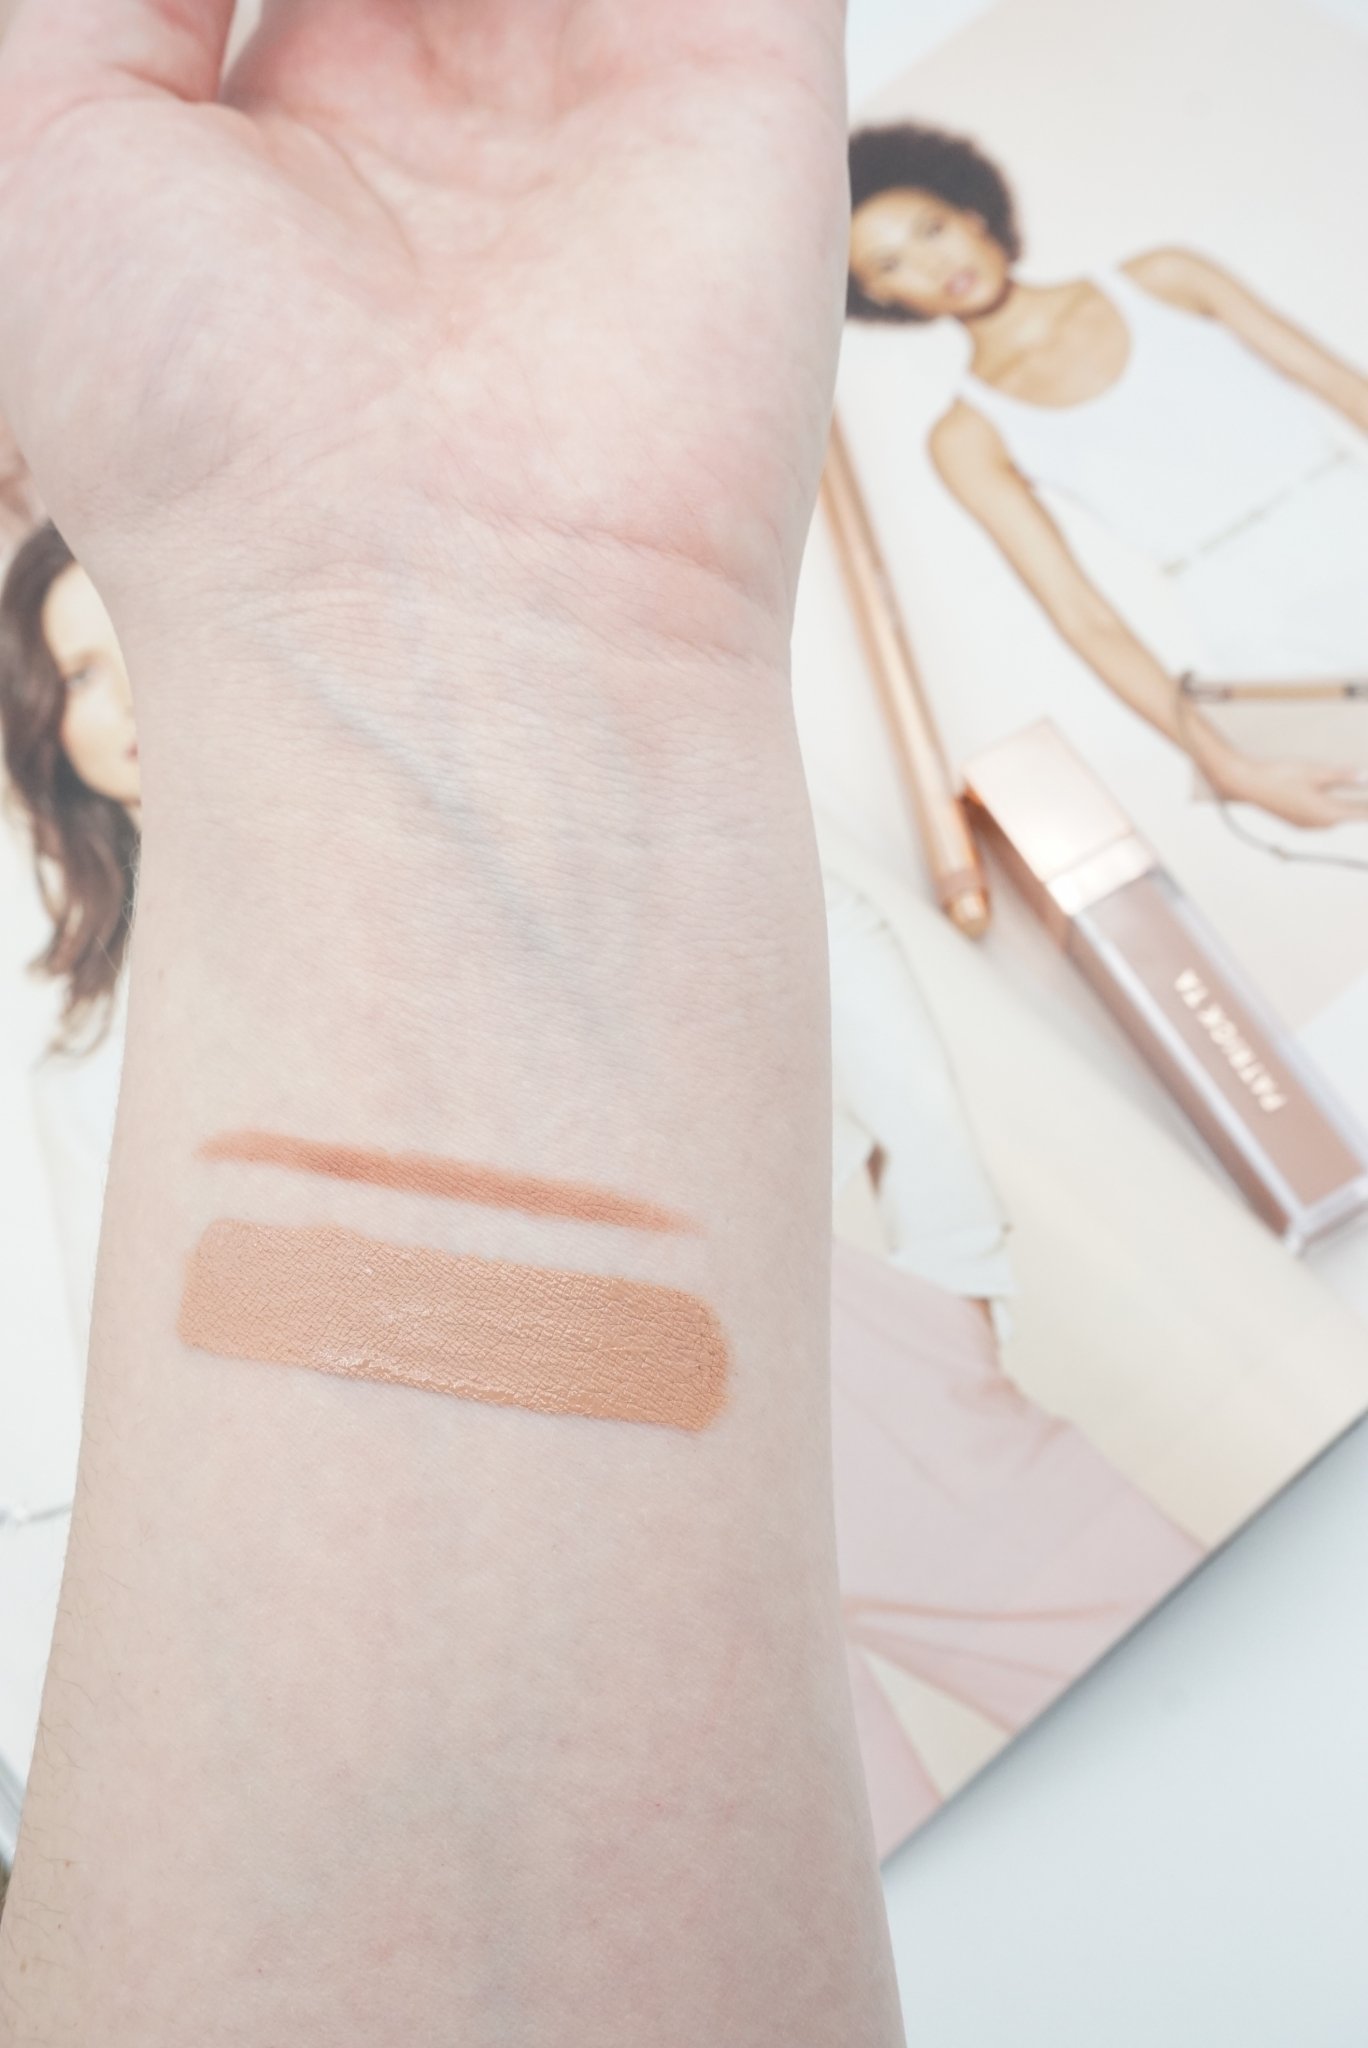 Patrick Ta Products To Create The Perfect Nude Lip